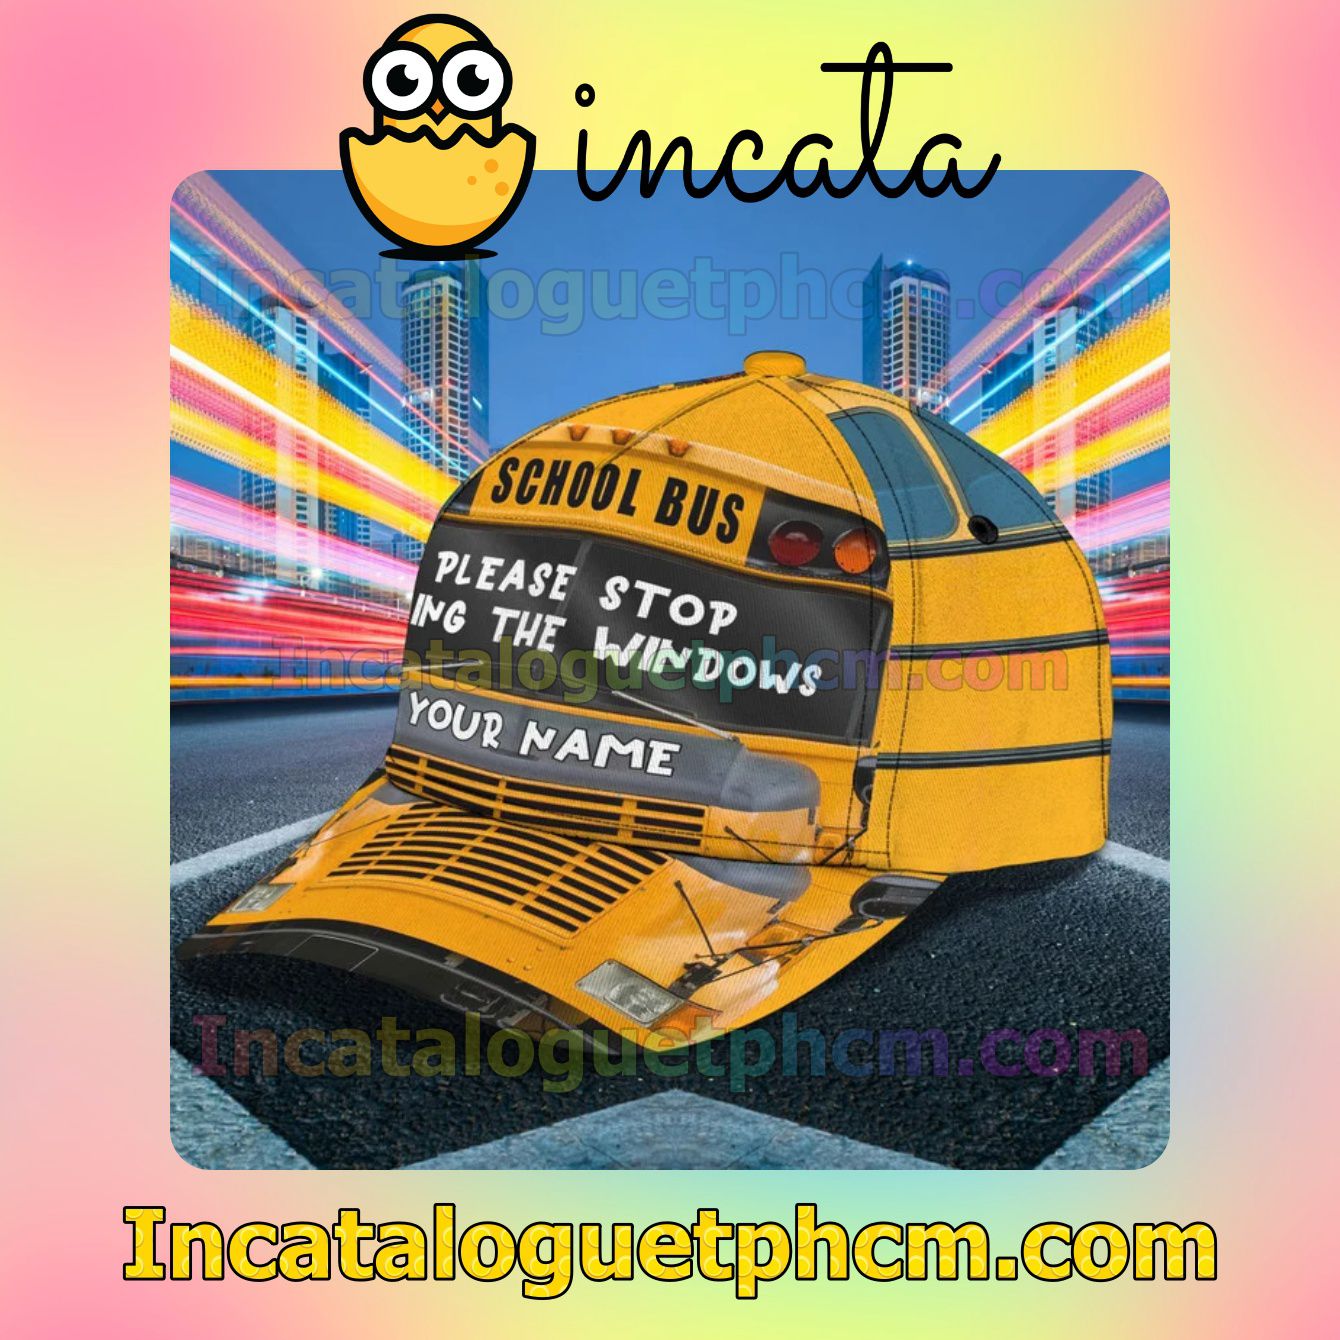 Handmade Personalized School Bus Please Stop Licking The Windows Classic Hat Caps Gift For Men